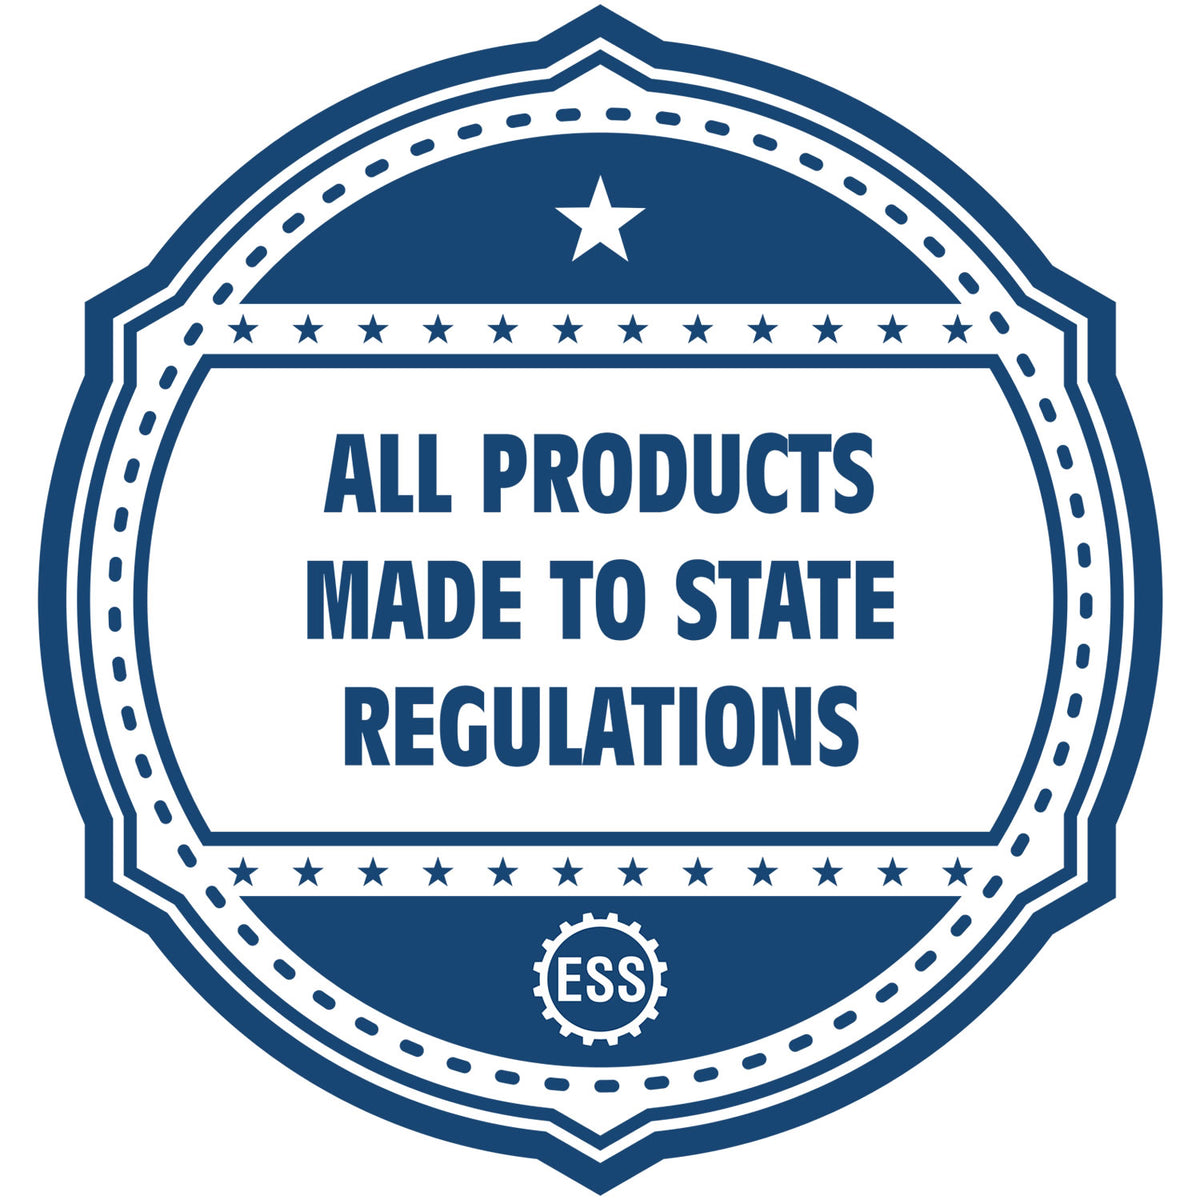 An icon or badge element for the State of Michigan Extended Long Reach Engineer Seal showing that this product is made in compliance with state regulations.